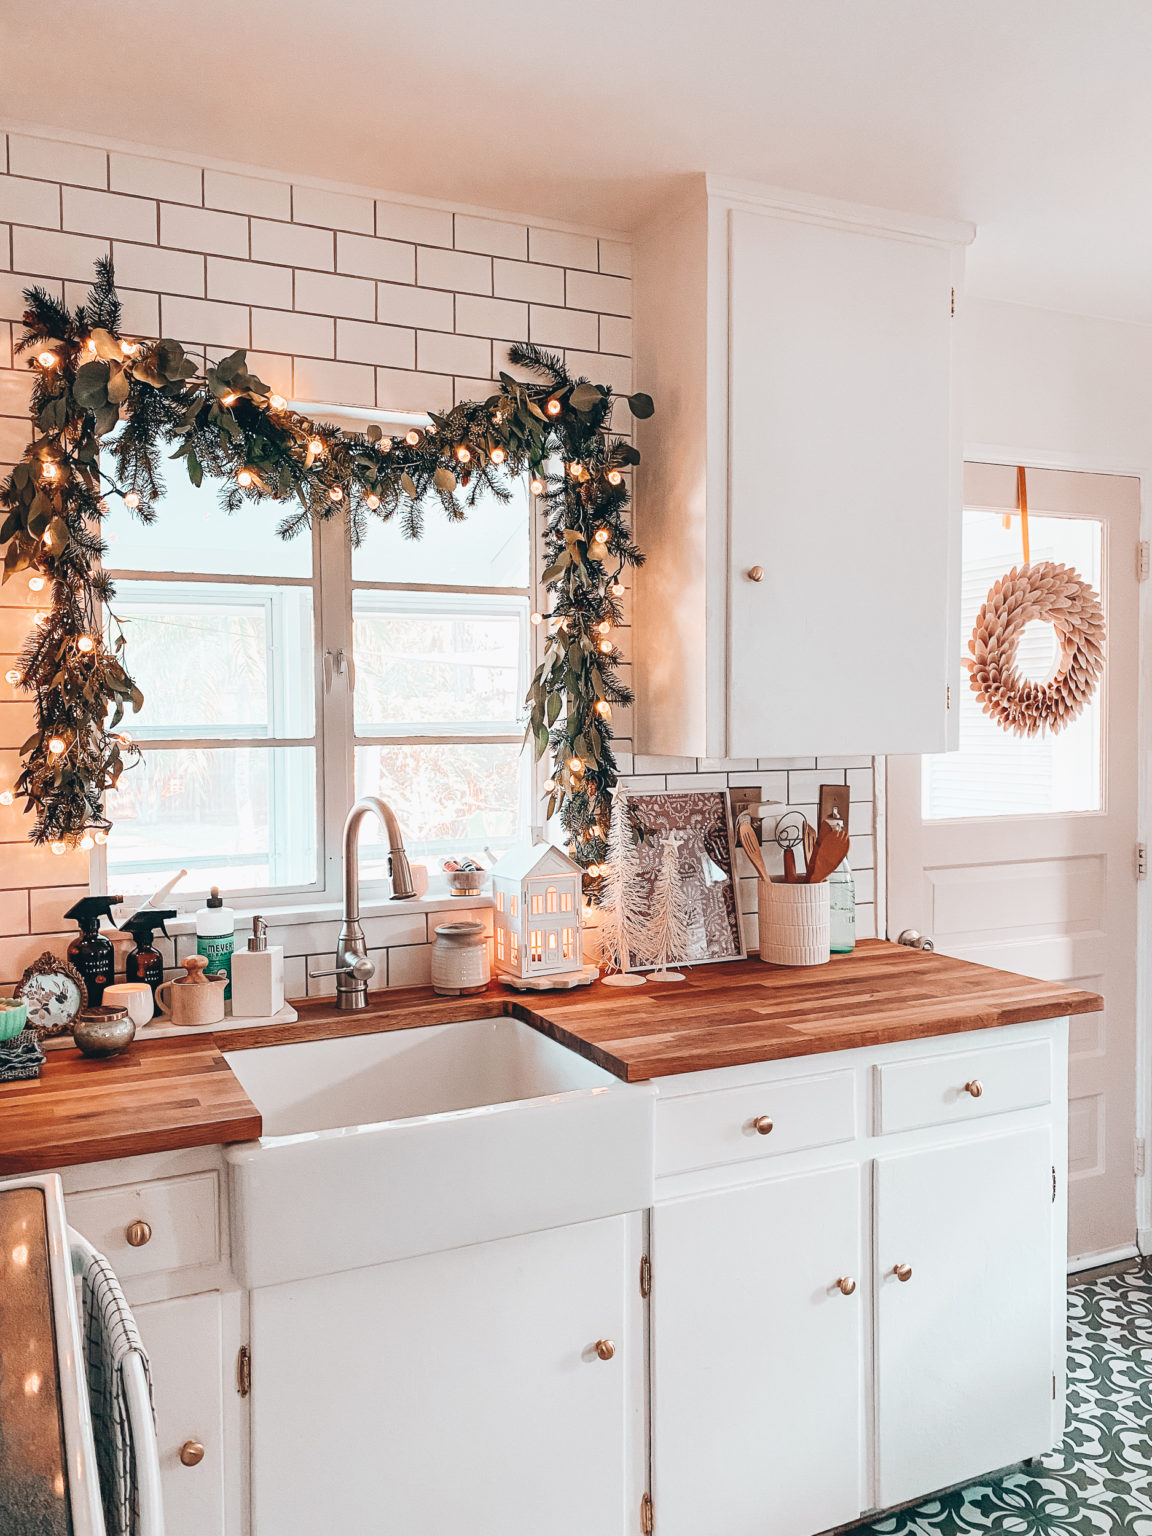 CHRISTMAS GARLAND, TREE AND OTHER HOLIDAY DÉCOR IN OUR KITCHEN ...